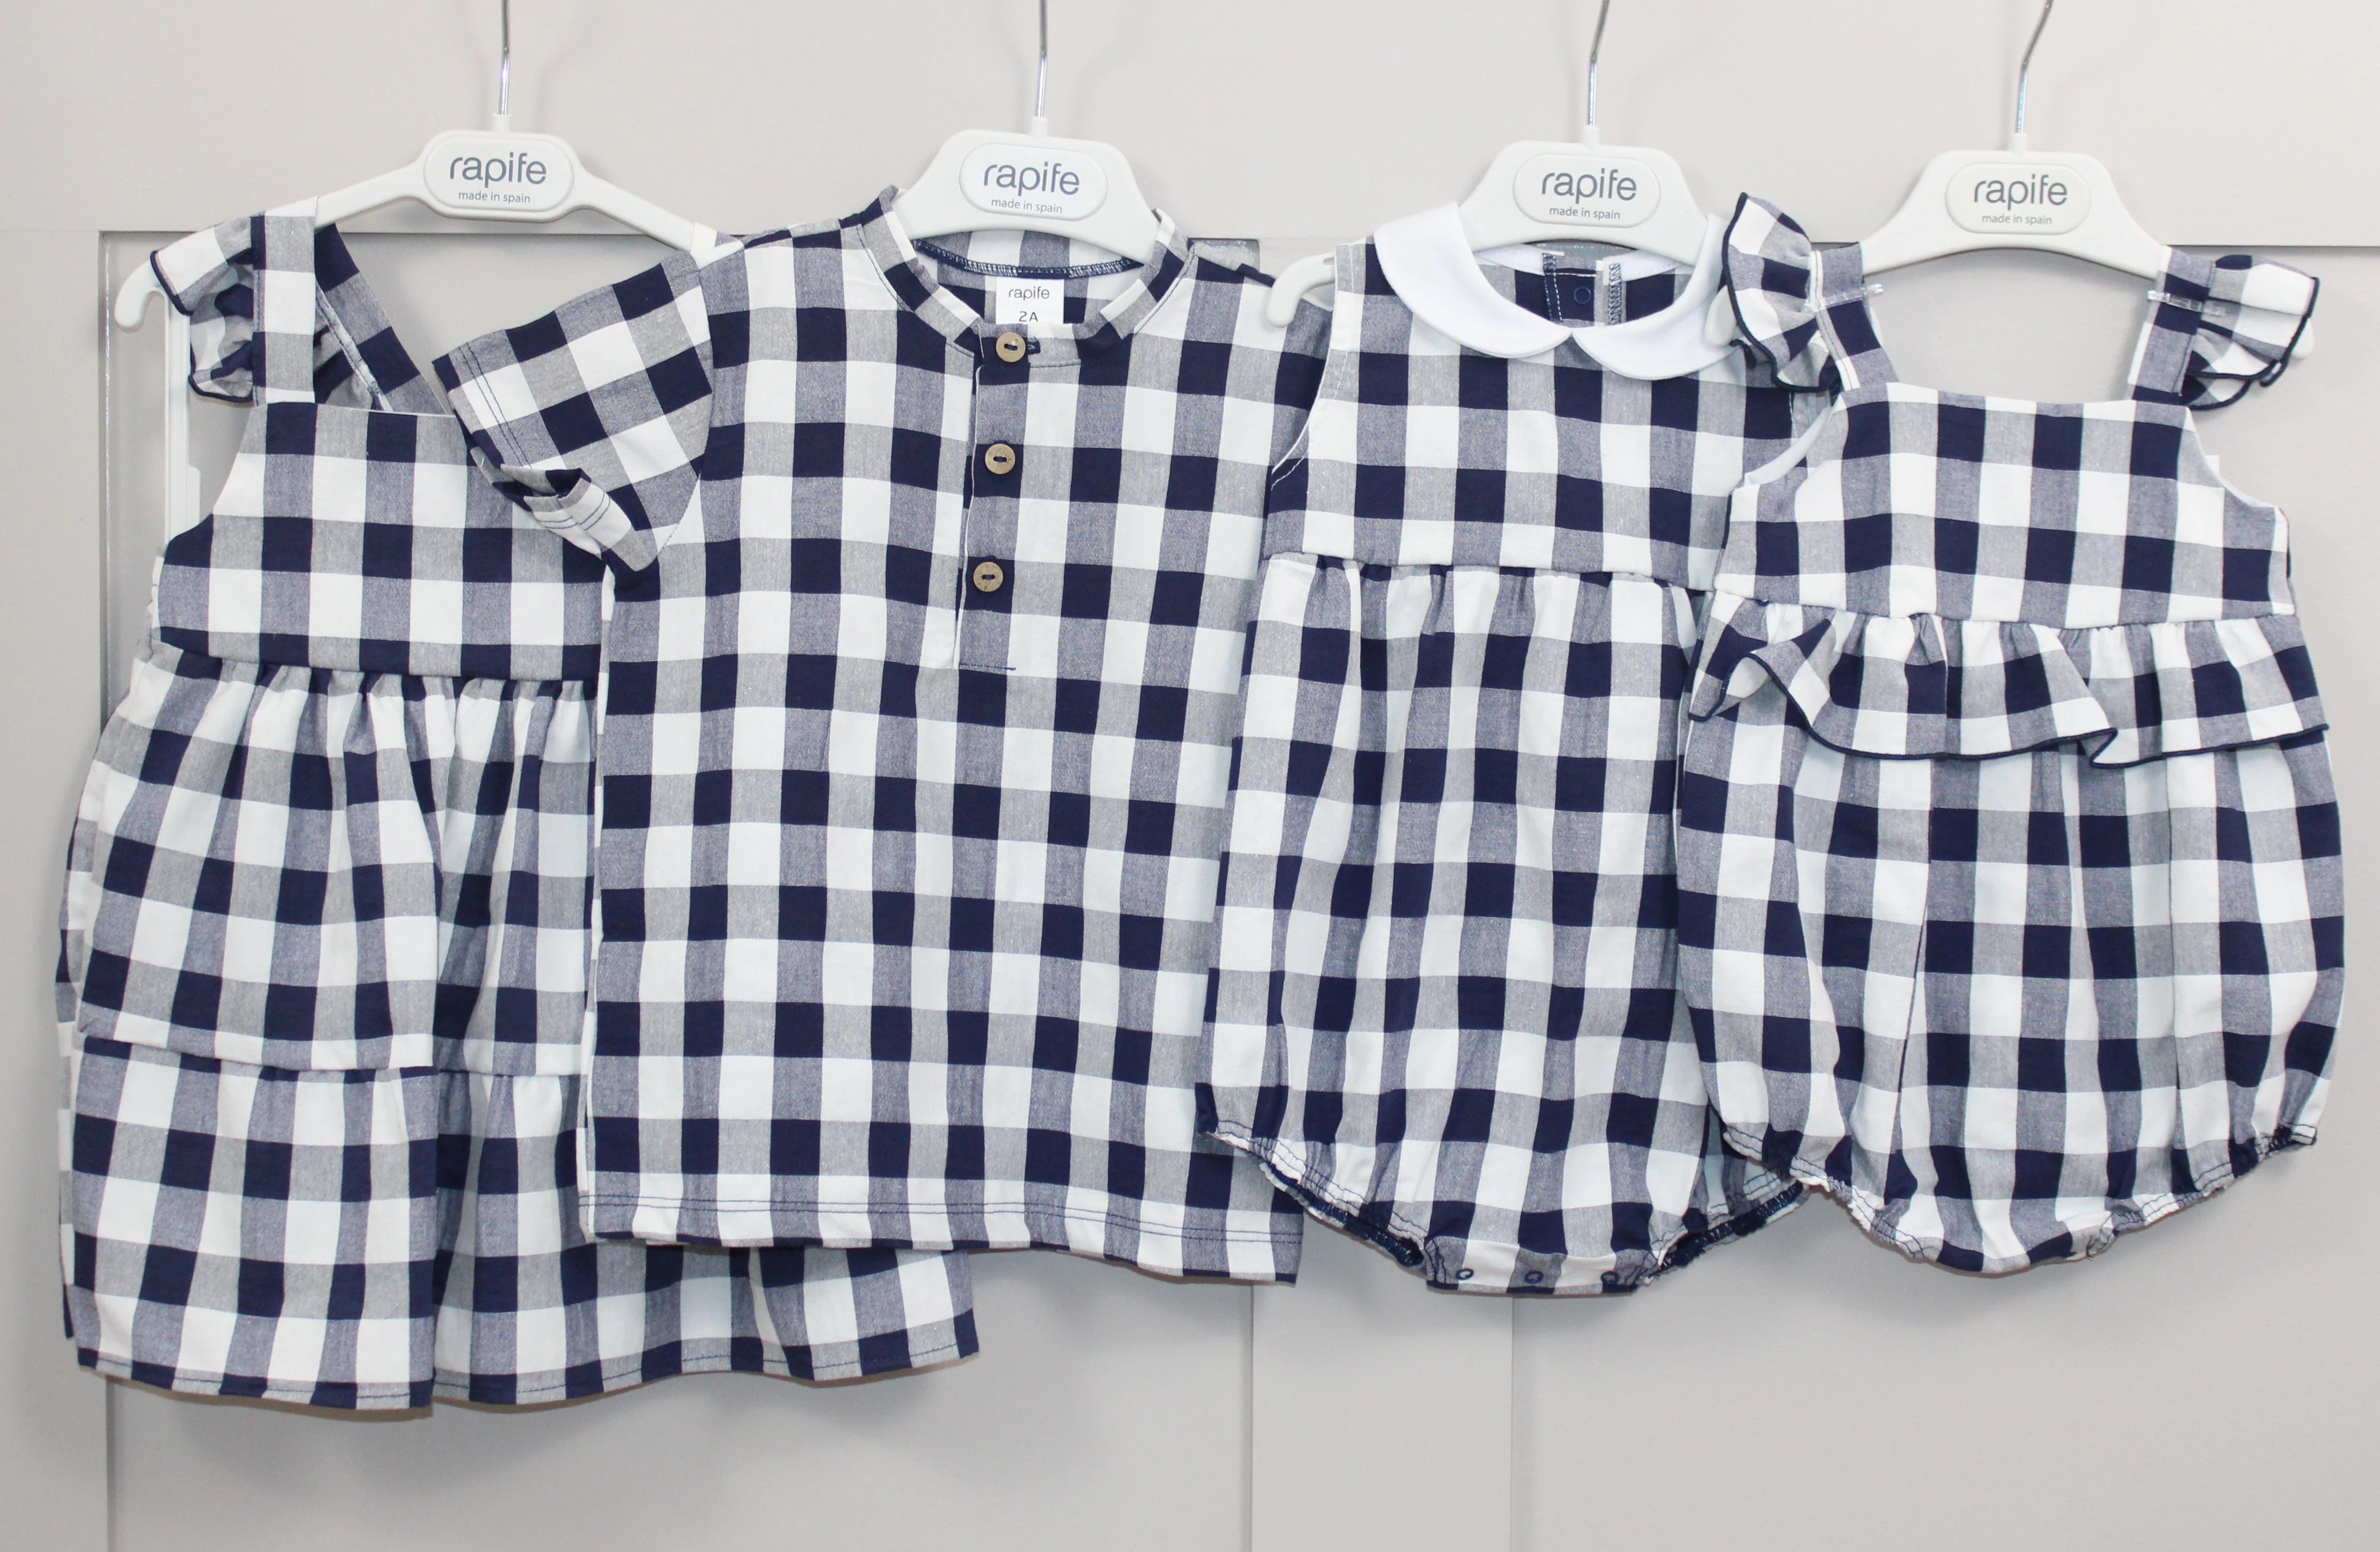 rapife Navy check summer collection